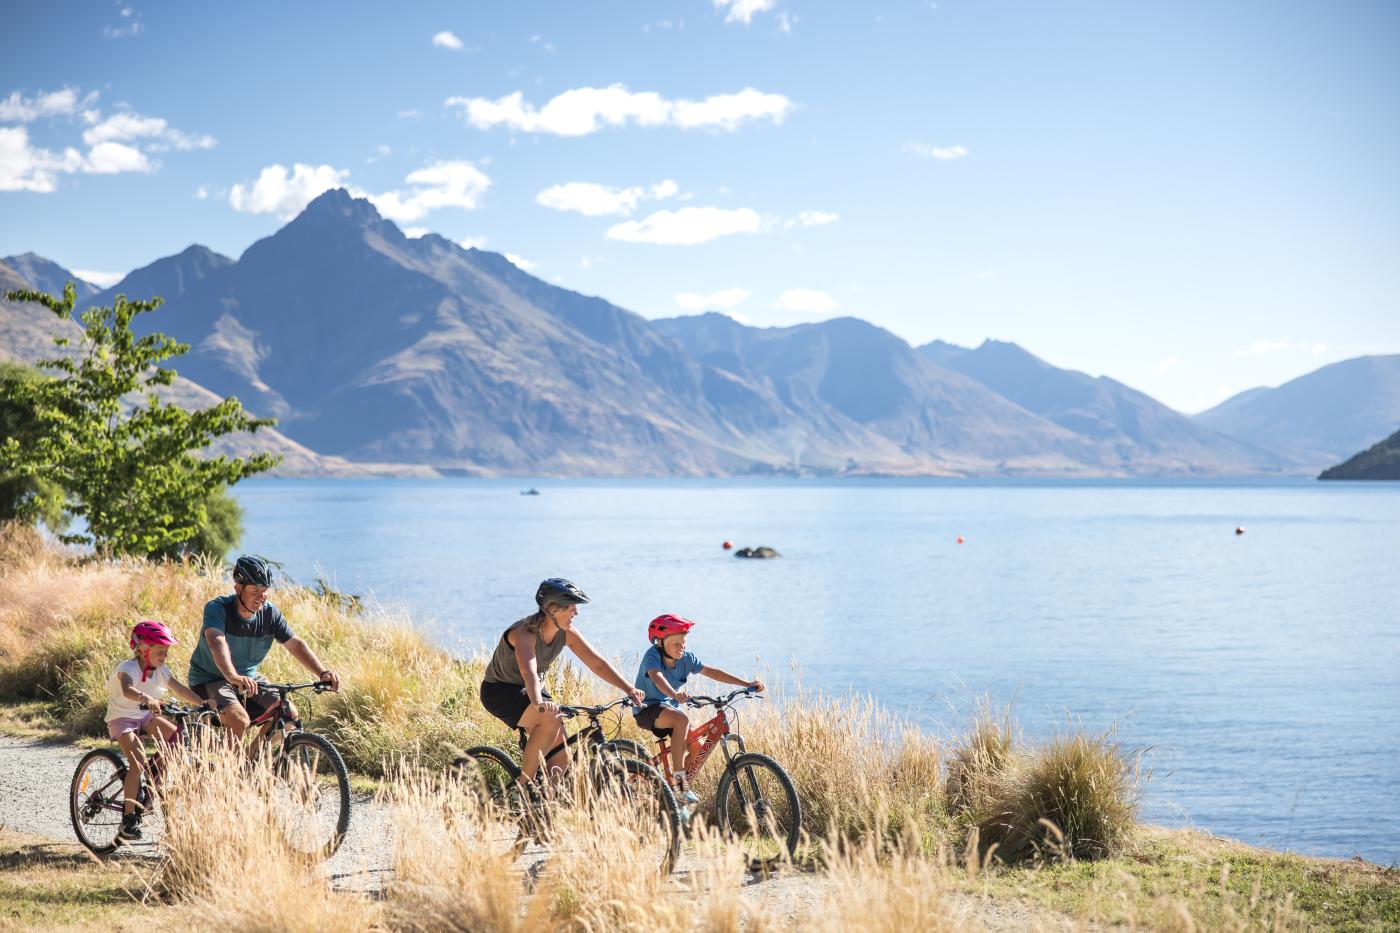 A Family biking around the Queenstown Gardens, with Lake Whakatipu and Cecil Peak in the background